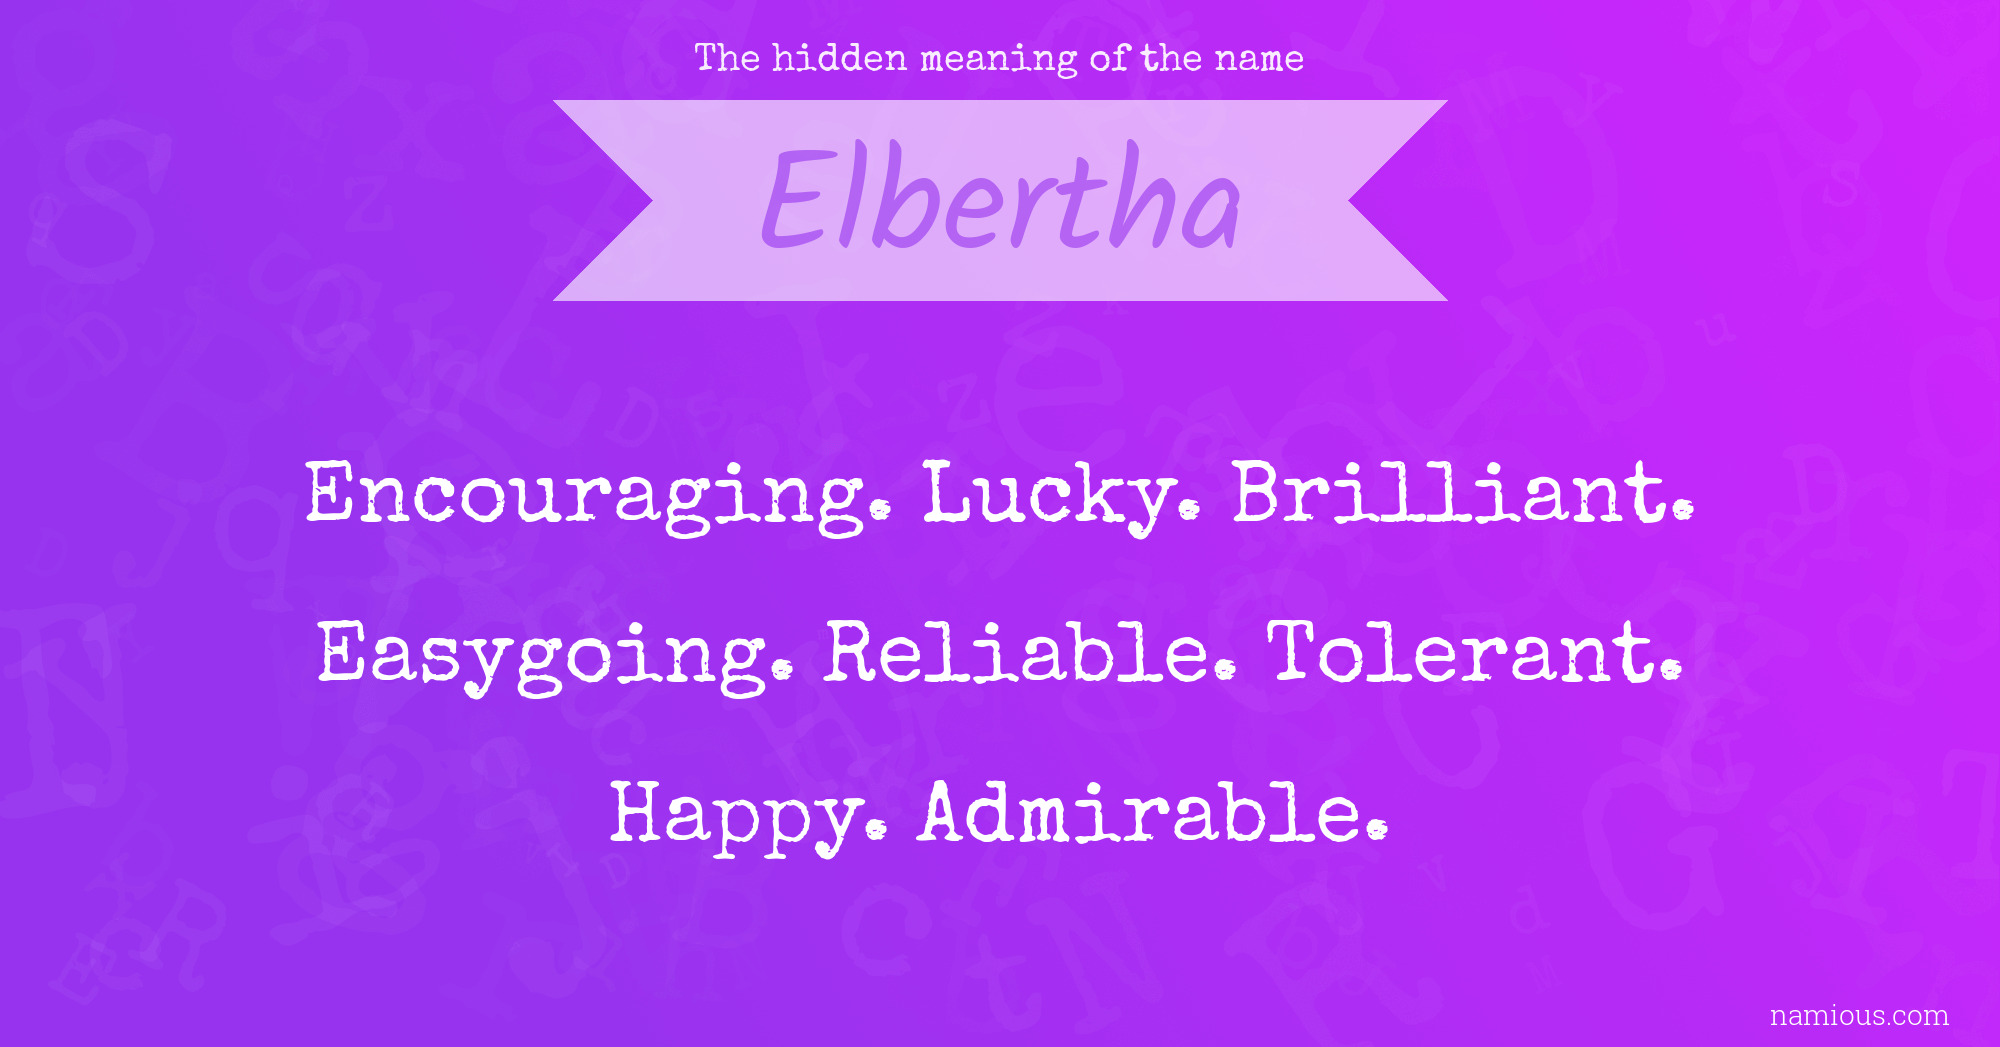 The hidden meaning of the name Elbertha